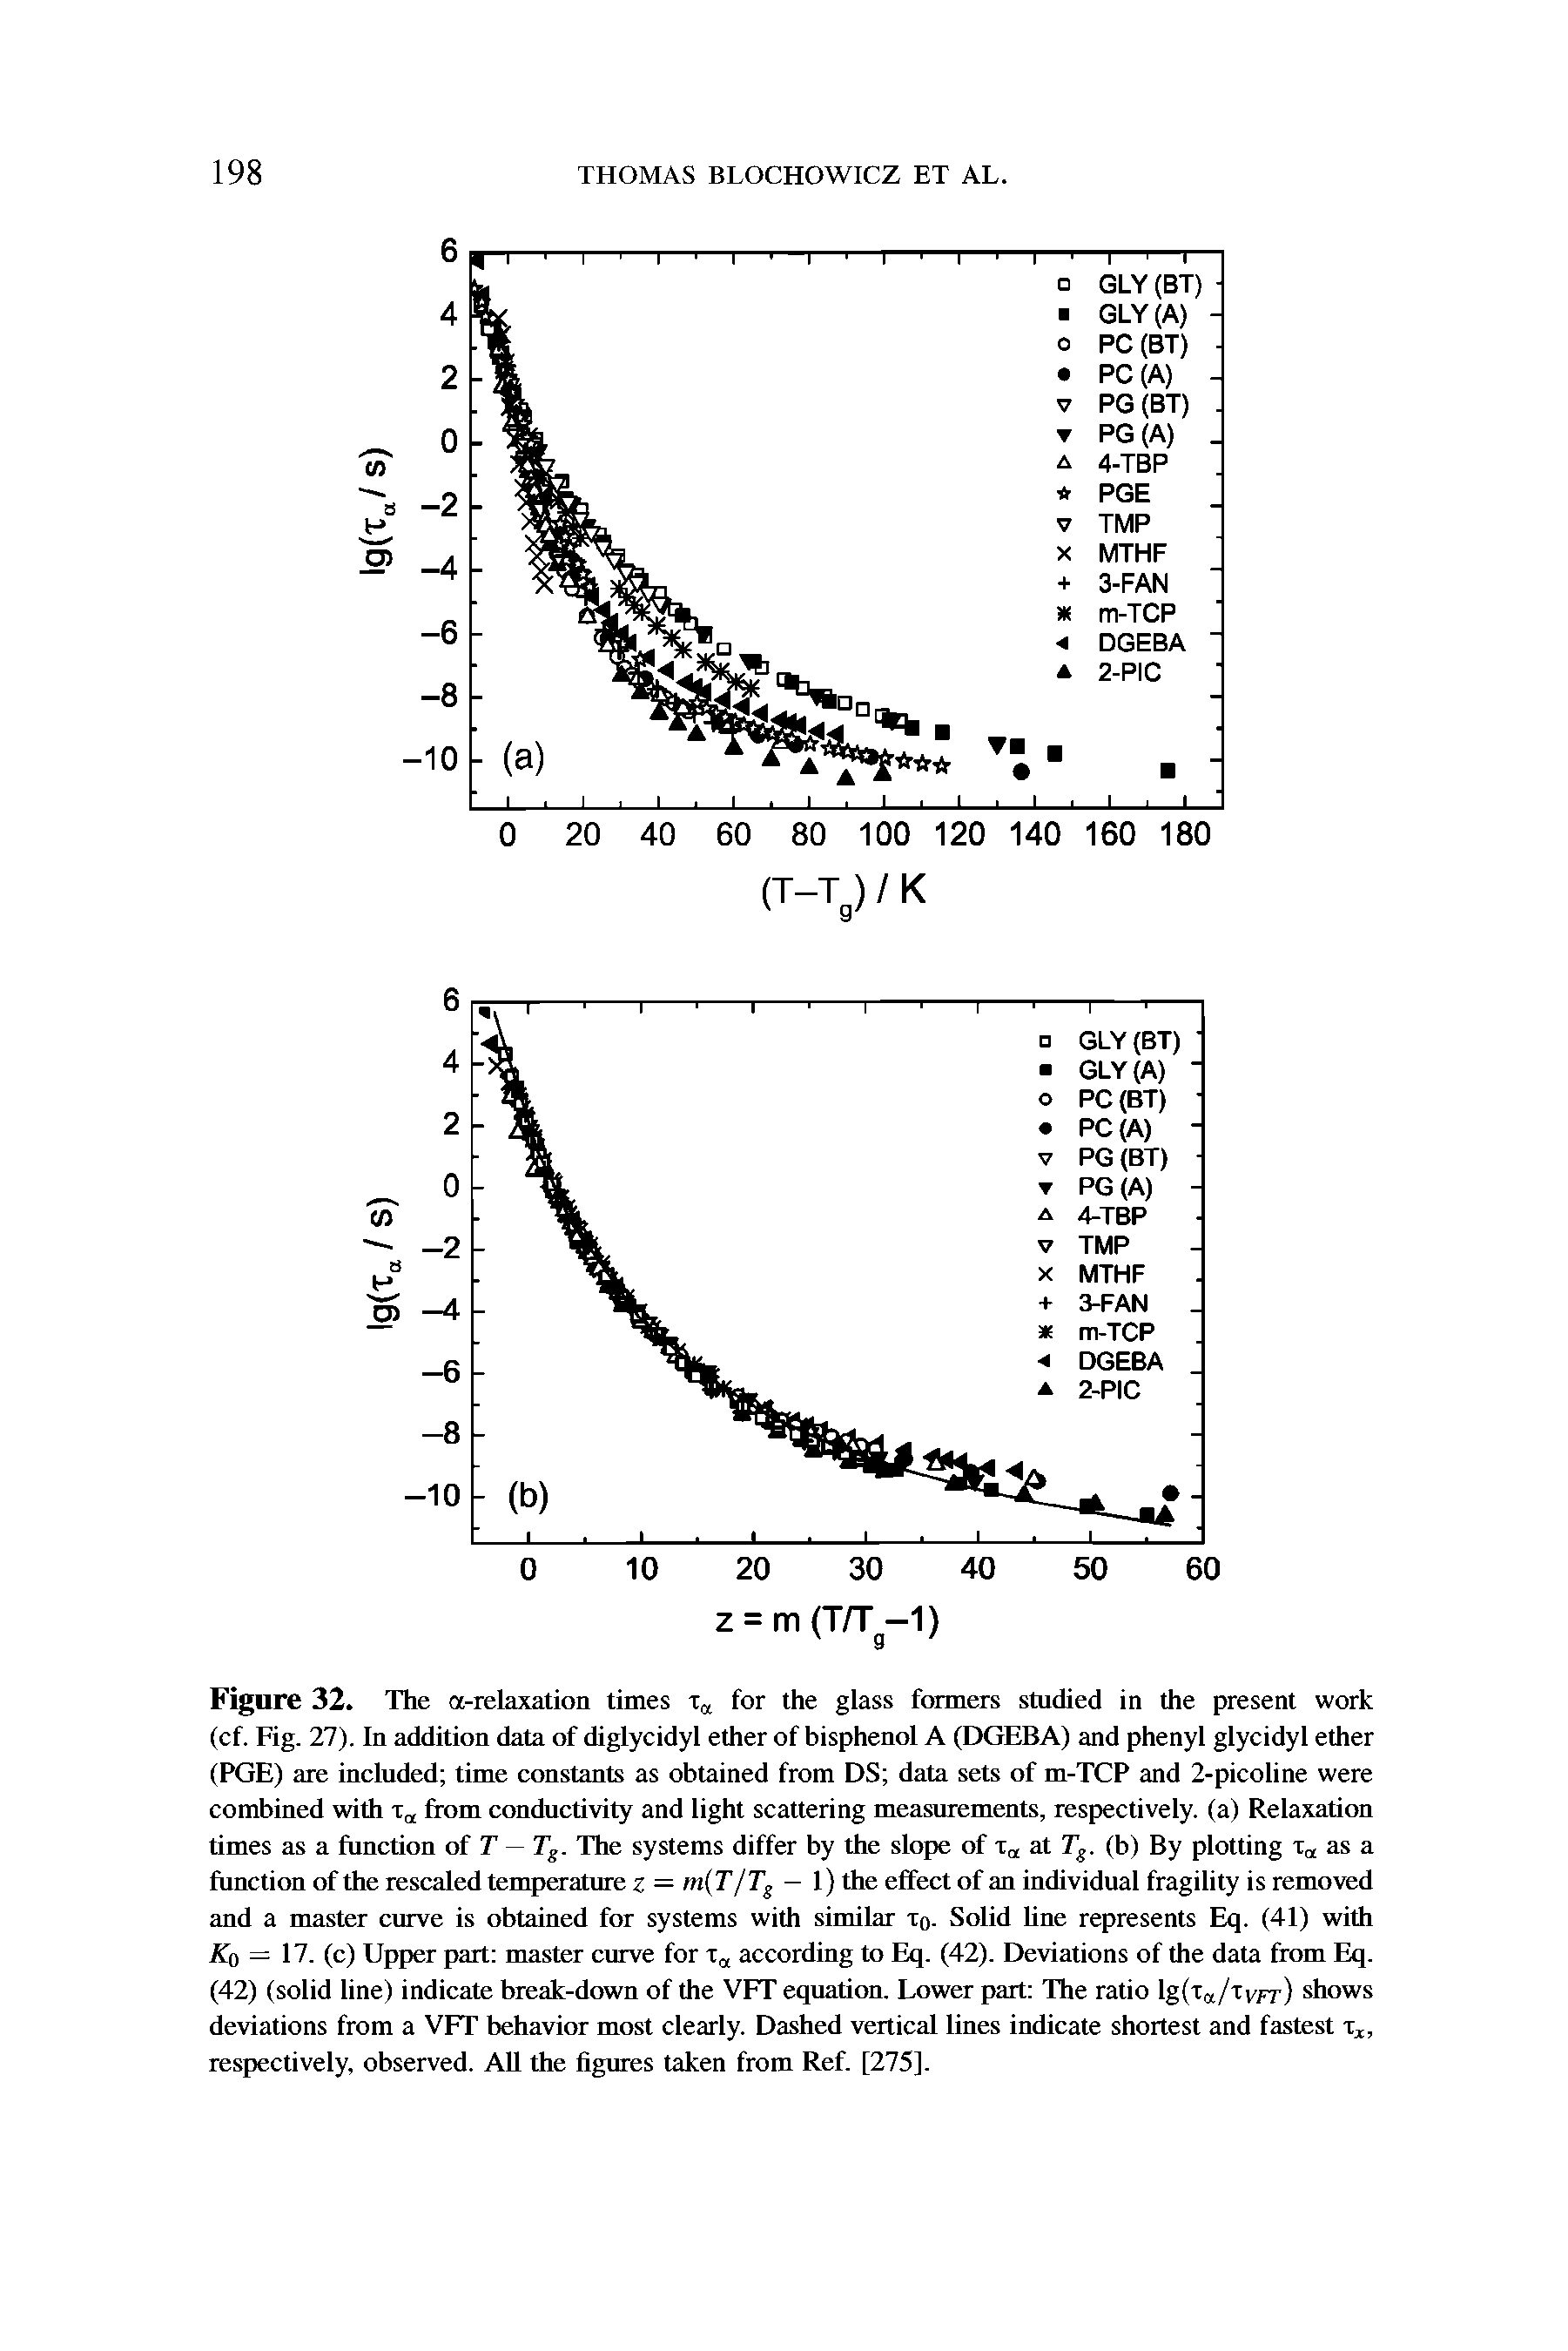 Figure 32. The a-relaxation times for the glass formers studied in the present work (cf. Fig. 27). In addition data of diglycidyl ether of bisphenol A (DGEBA) and phenyl glycidyl ether (PGE) are included time constants as obtained from DS data sets of m-TCP and 2-picoline were combined with xrl from conductivity and light scattering measurements, respectively, (a) Relaxation times as a function of T Ts. The systems differ by the slope of Ta at Tg. (b) By plotting xr, as a function of the rescaled temperature z = m(T/Tg — 1) the effect of an individual fragility is removed and a master curve is obtained for systems with similar To. Solid line represents Eq. (41) with Kf) — 17. (c) Upper part master curve for xa according to Eq. (42). Deviations of the data from Eq. (42) (solid line) indicate break-down of the VFT equation. Lower part The ratio lg(ra/rvft) shows deviations from a VFT behavior most clearly. Dashed vertical lines indicate shortest and fastest tx, respectively, observed. All the figures taken from Ref. [275].